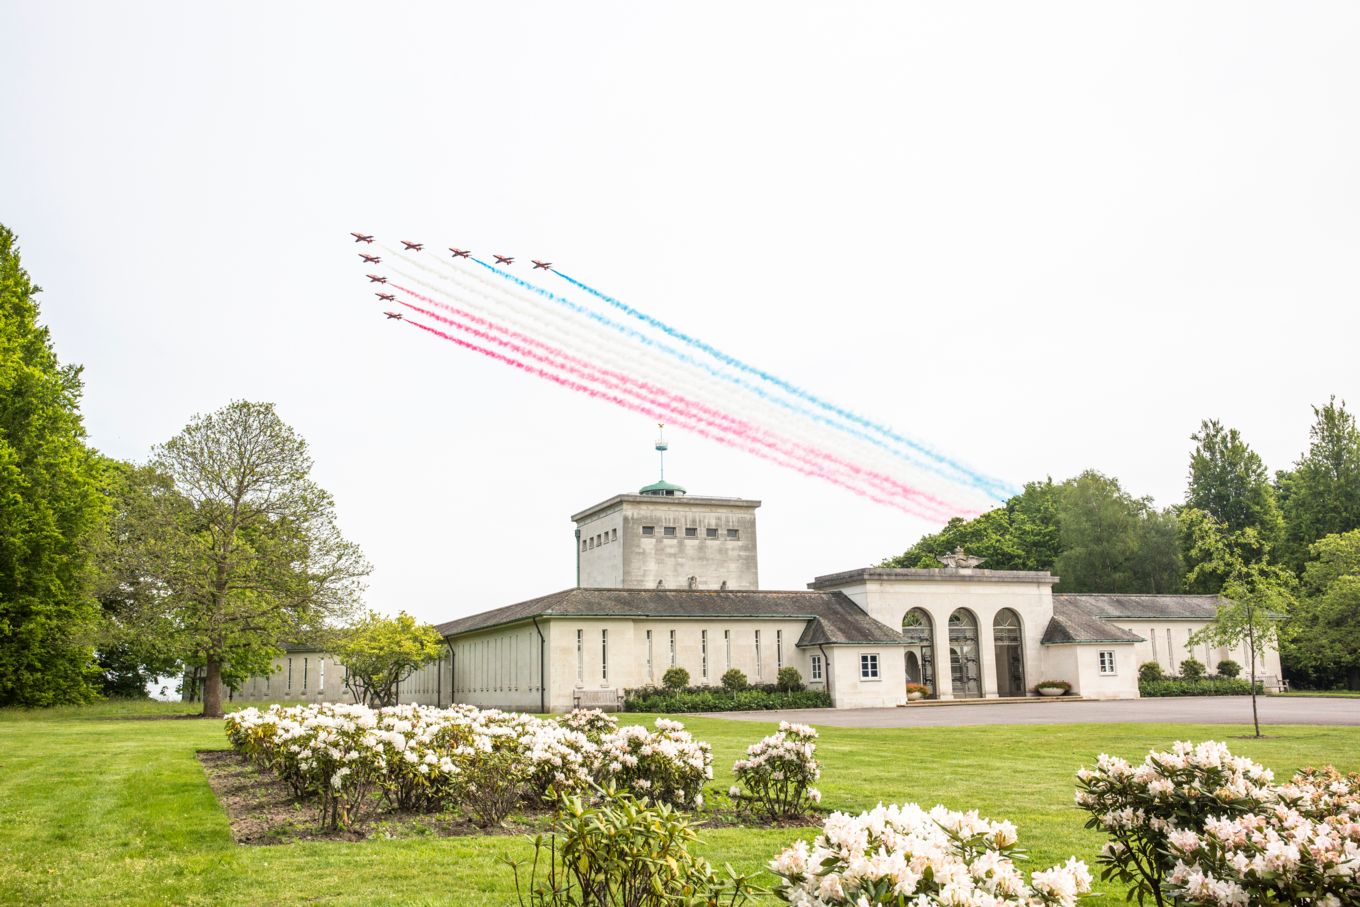 Marking VE Day 75 over the Runnymede Air Forces Memorial. Image by SAC Beth Roberts.